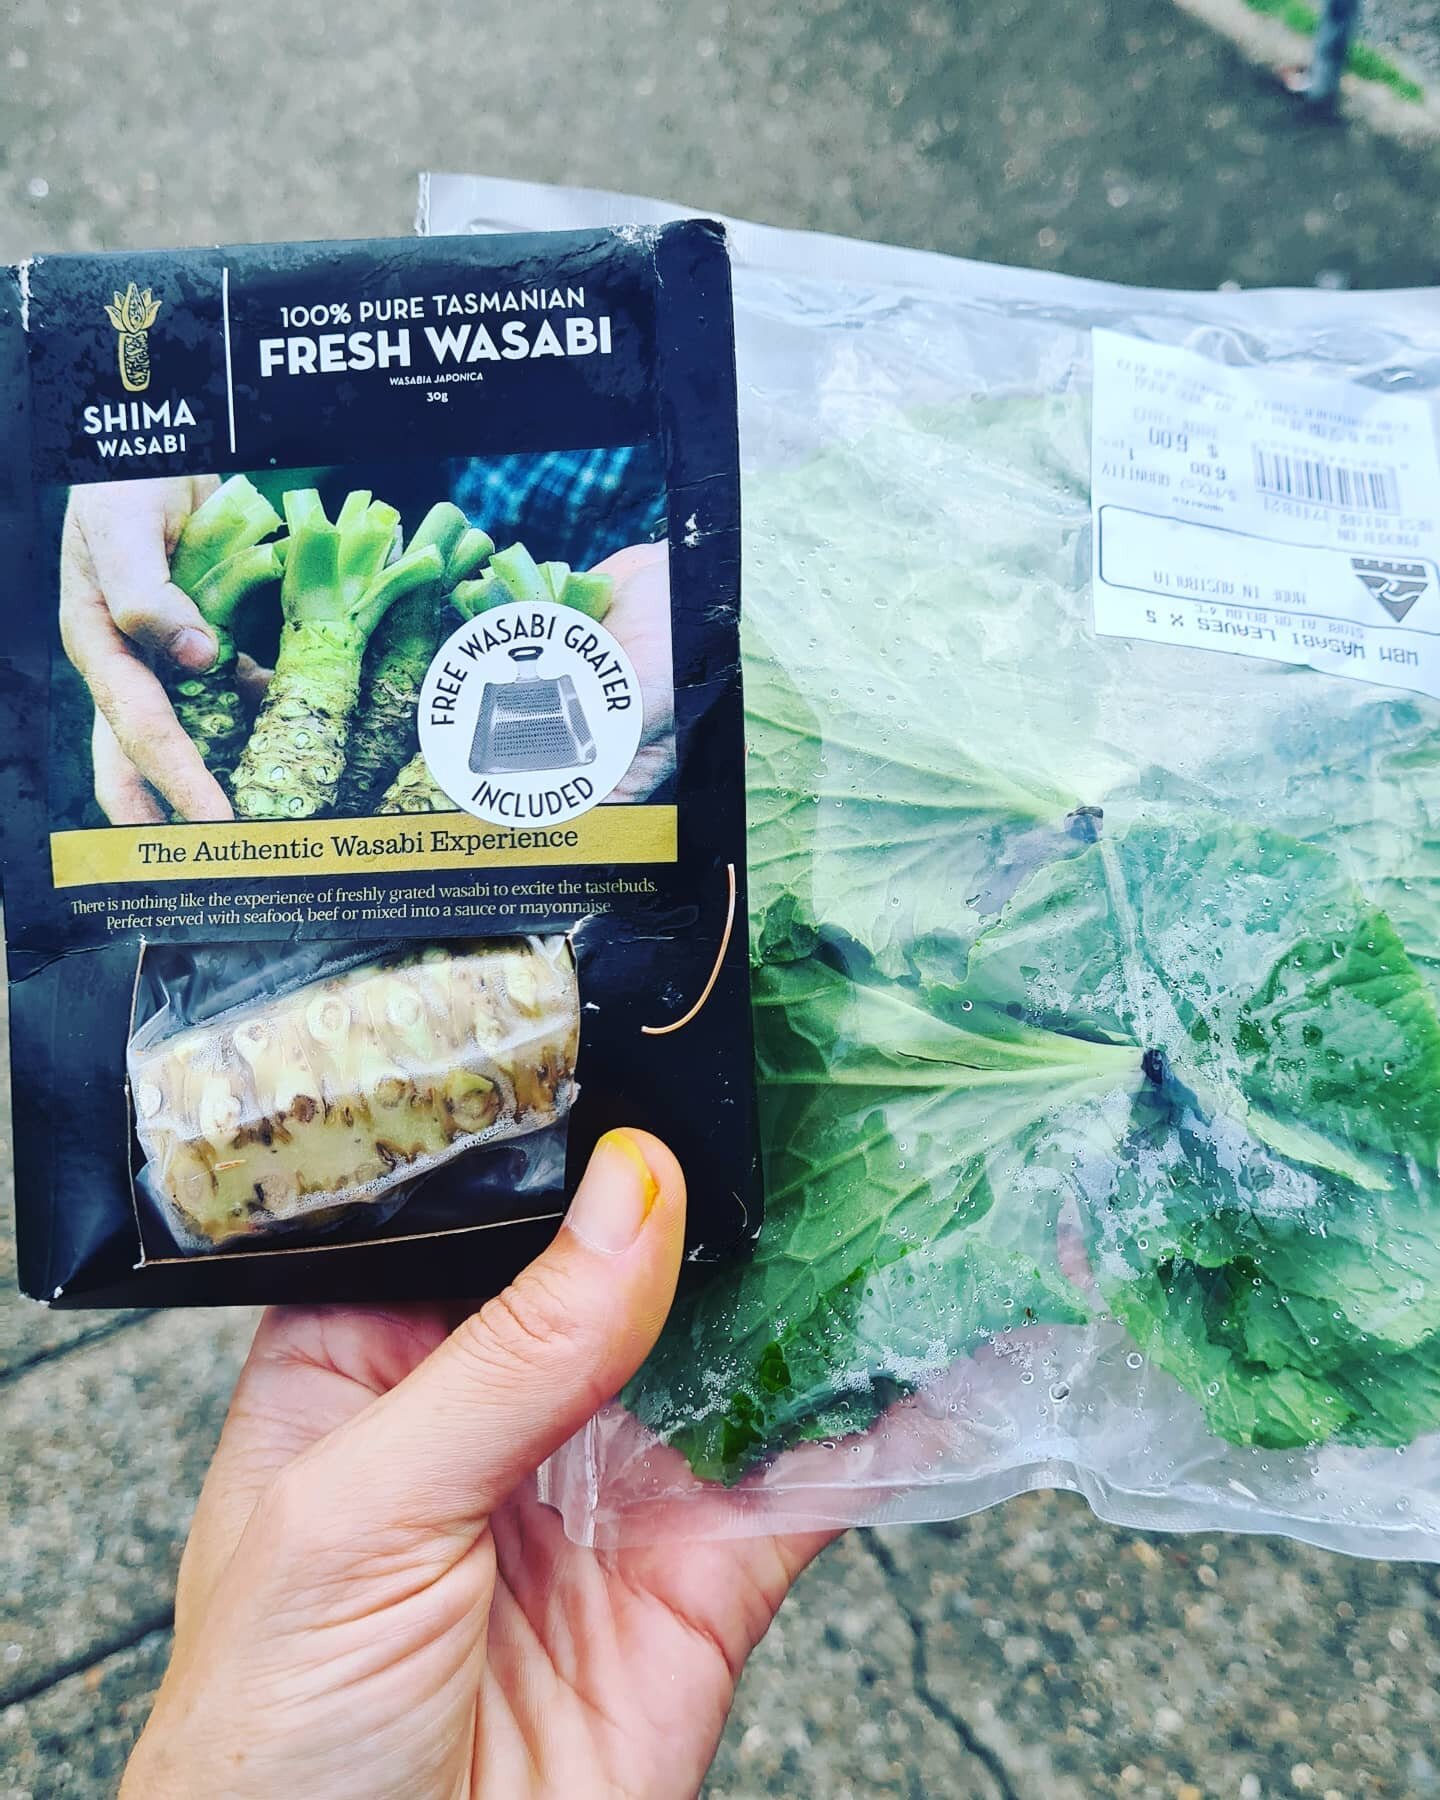 One happy girl!! I've been searching for fresh wasabi root and leaves for a delicious dish I'm doing for my upcoming retreat this weekend 👏🙌🙏😁😁😁 yay! 
I'm sure the guests will be happy too. I'll post the finished product......
Any guesses what 